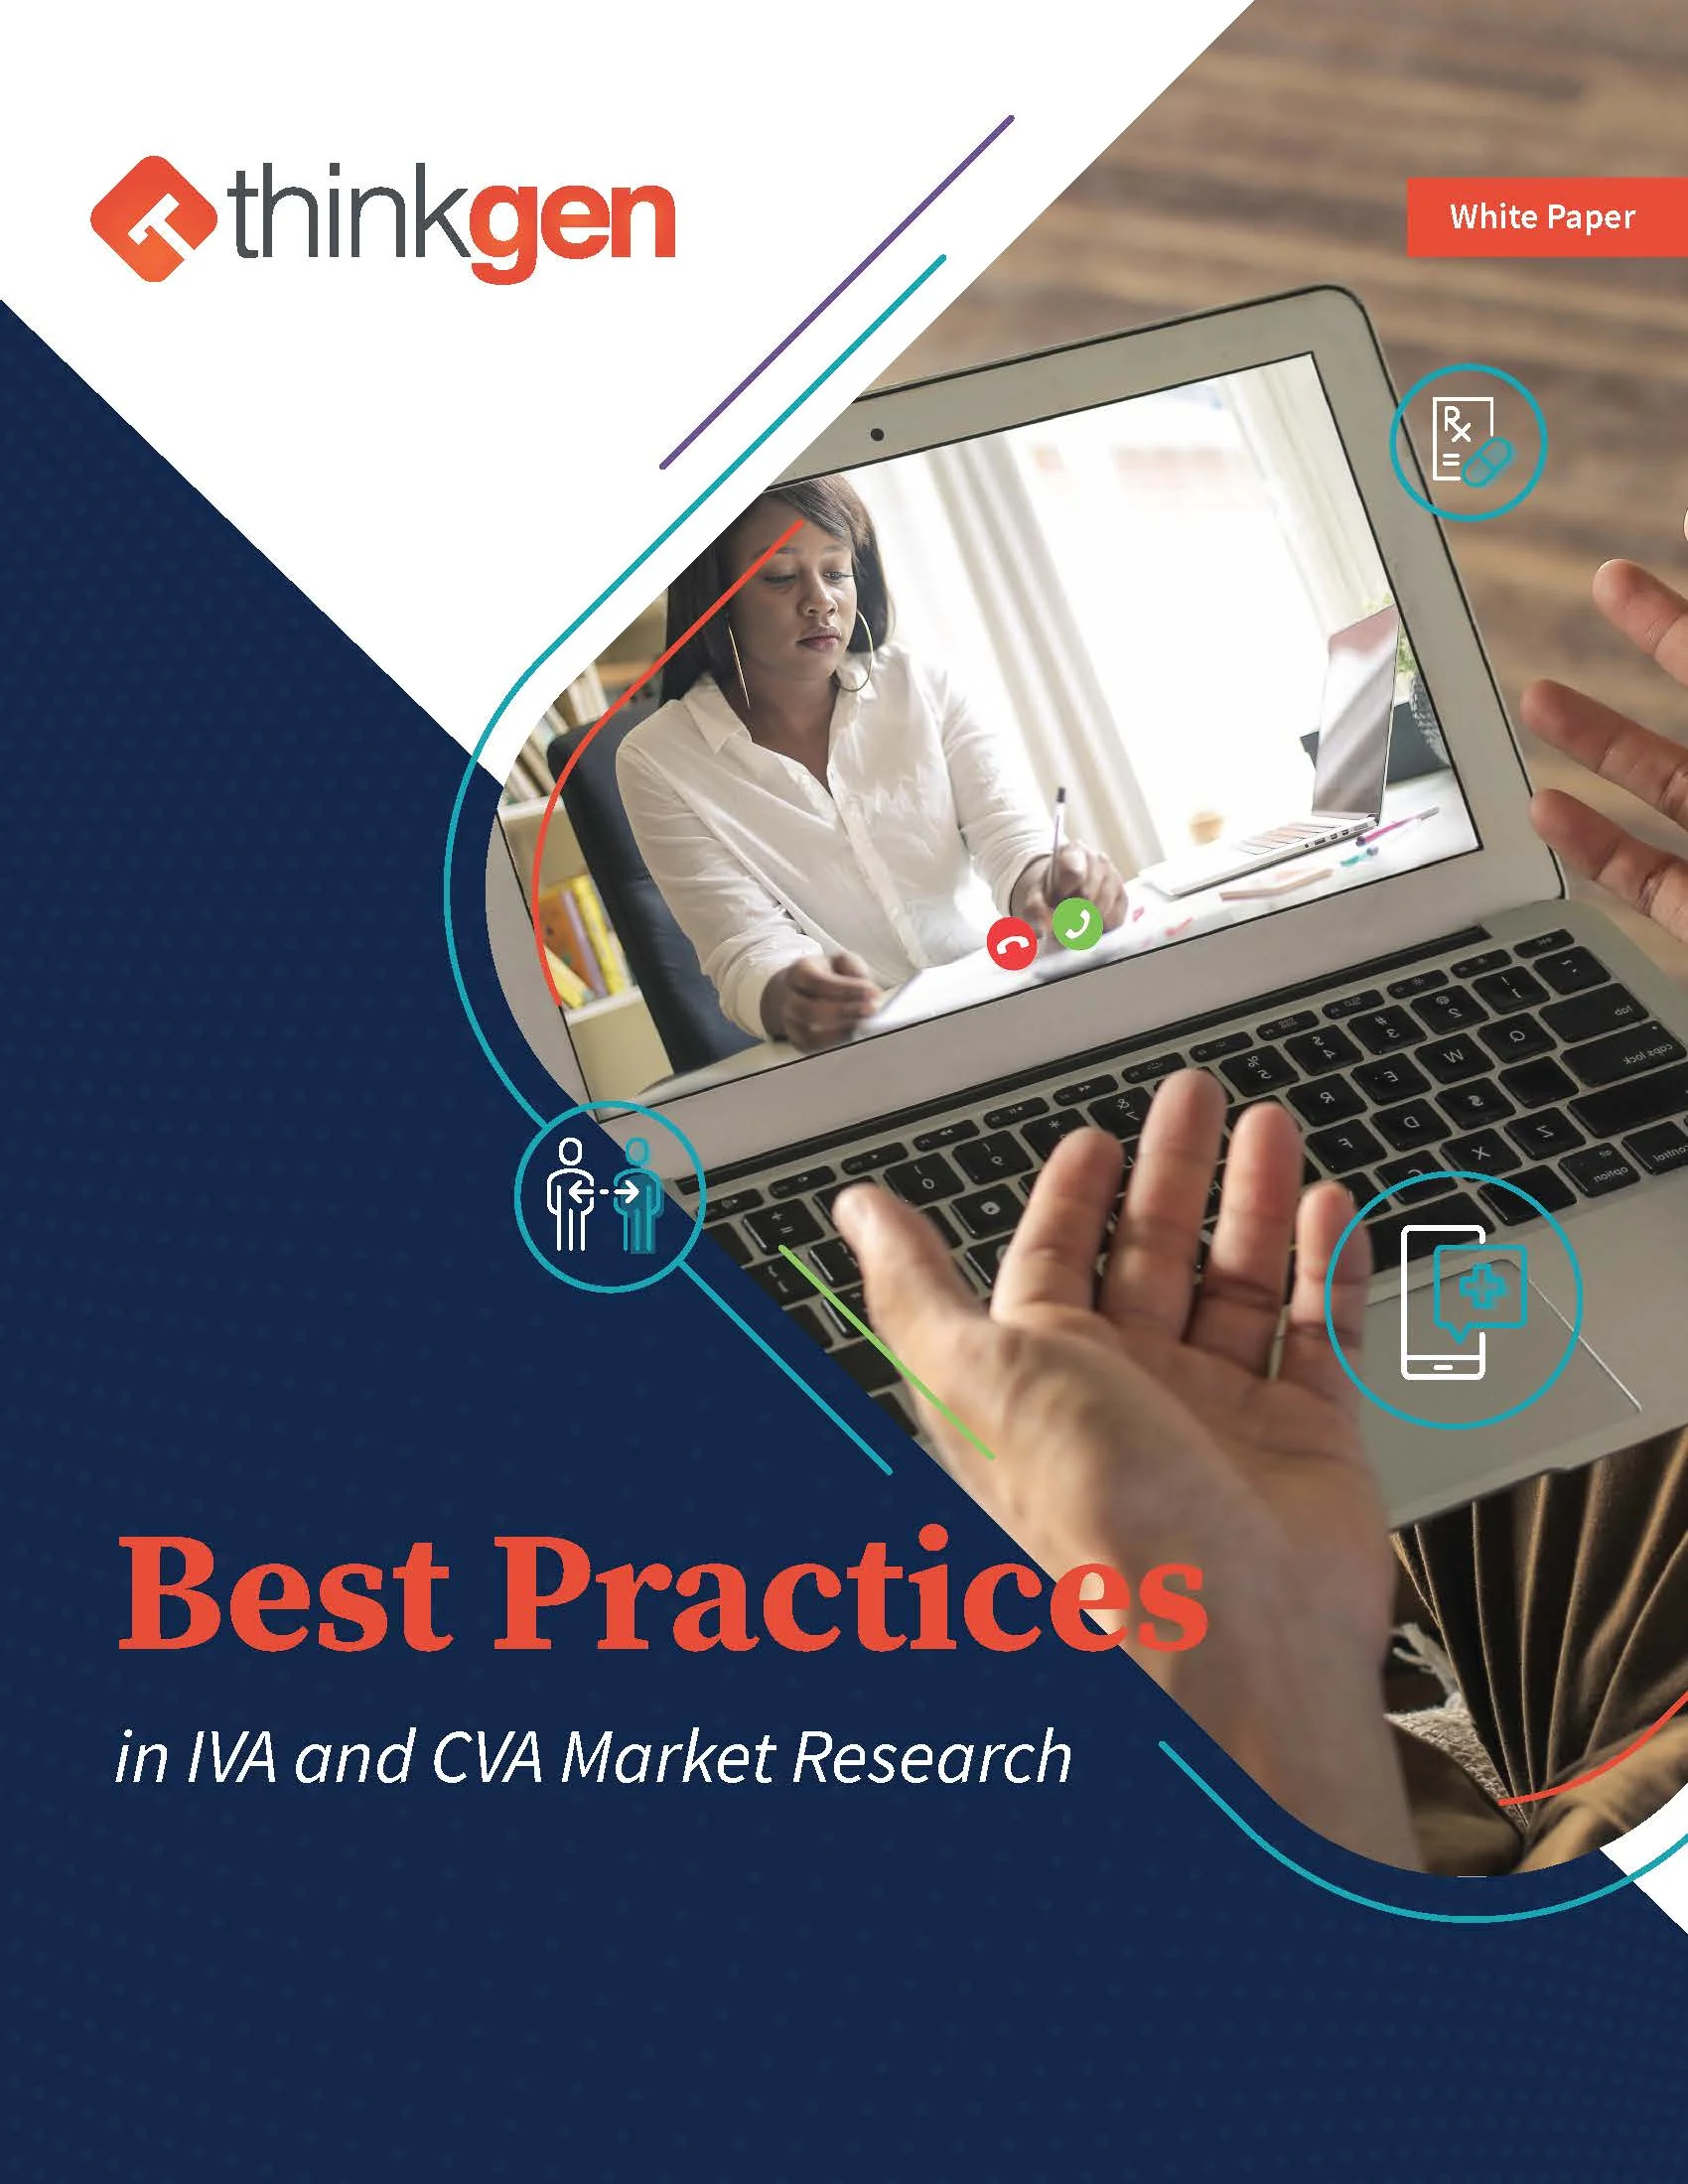 Best Practices in IVA and CVA Market Research